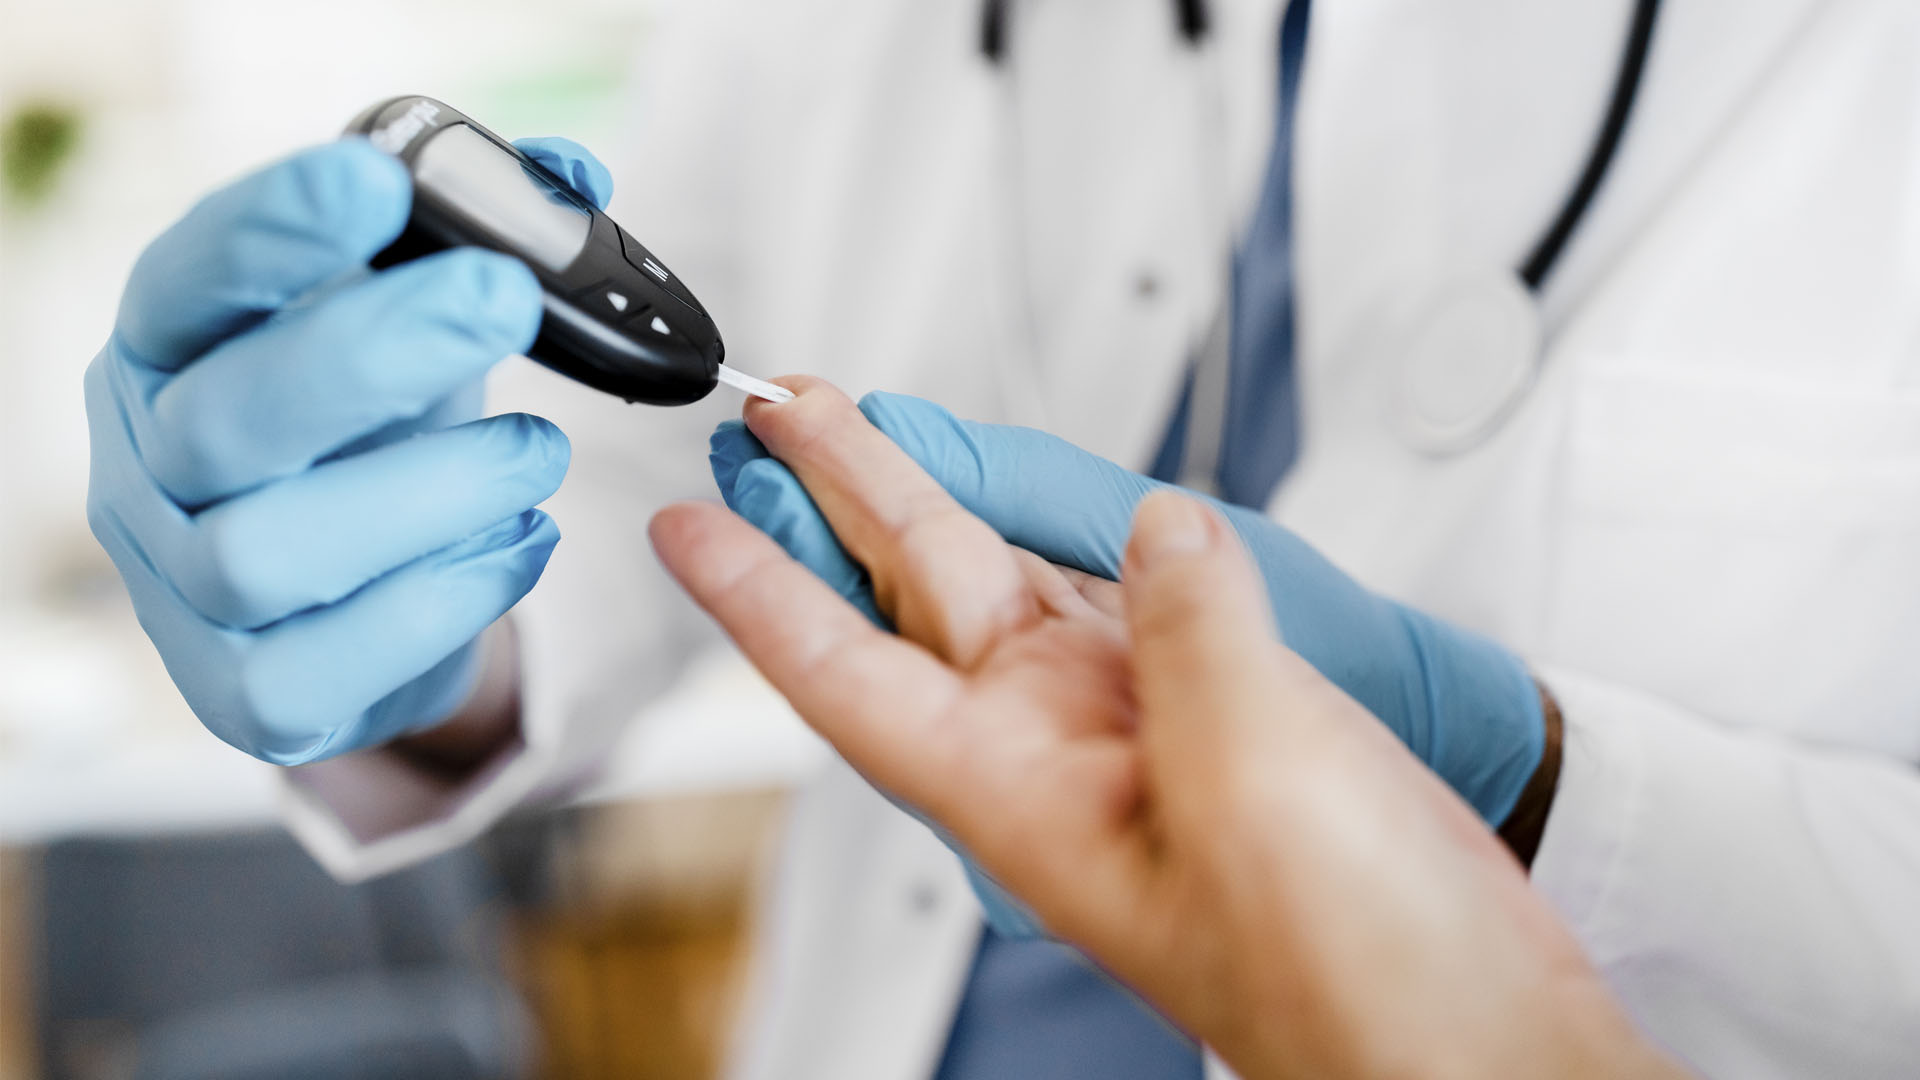 COVID-19 Infection May Lead to New-Onset Diabetes